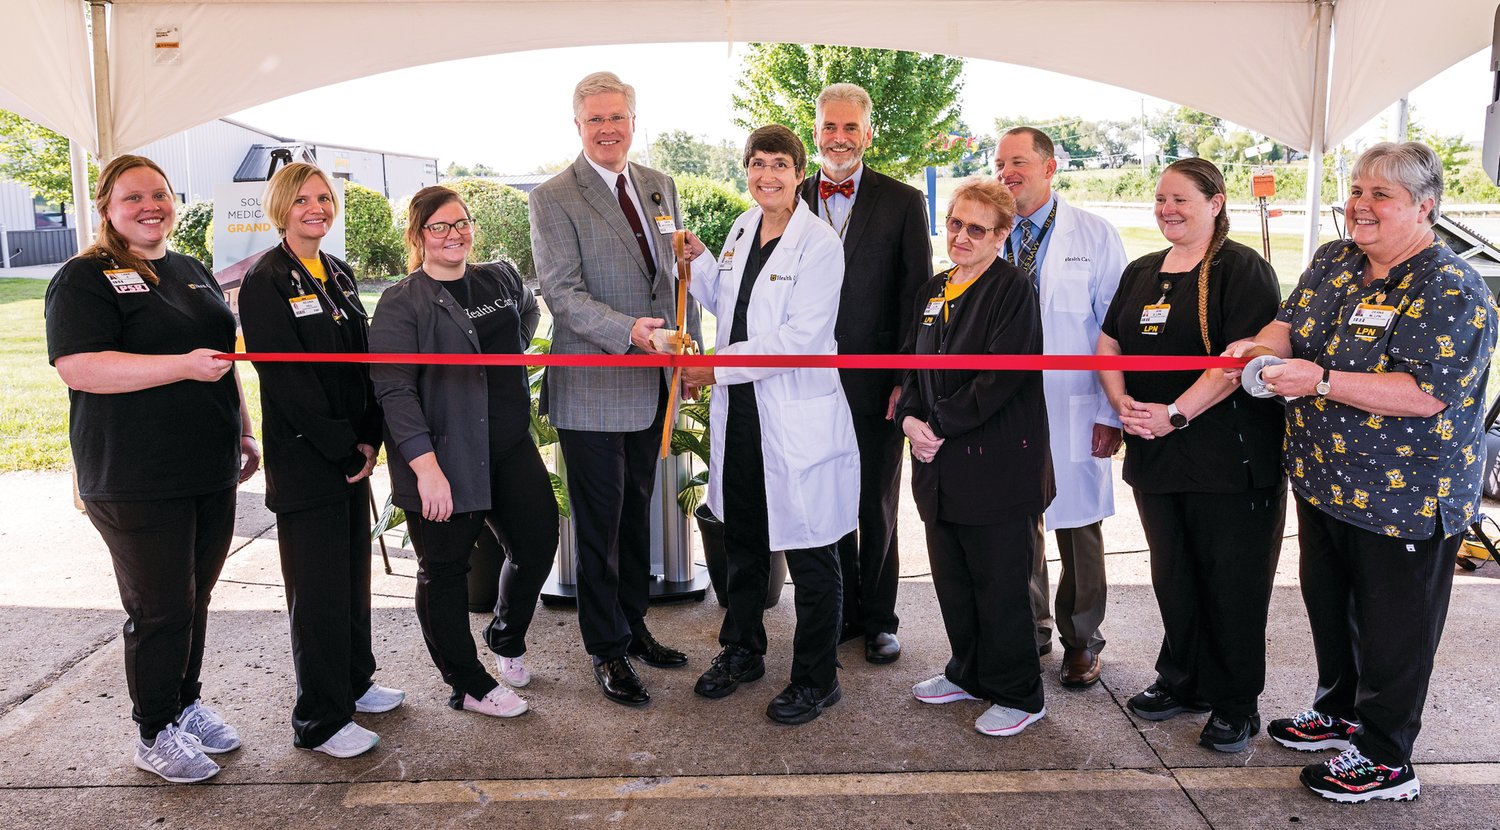 MU Health Care leaders and clinical staff cut the ribbon during a Grand Opening and Ribbon Cutting Ceremony at the South Clark Medical Building on Tuesday, Sept. 13, 2022 in Mexico, Mo.